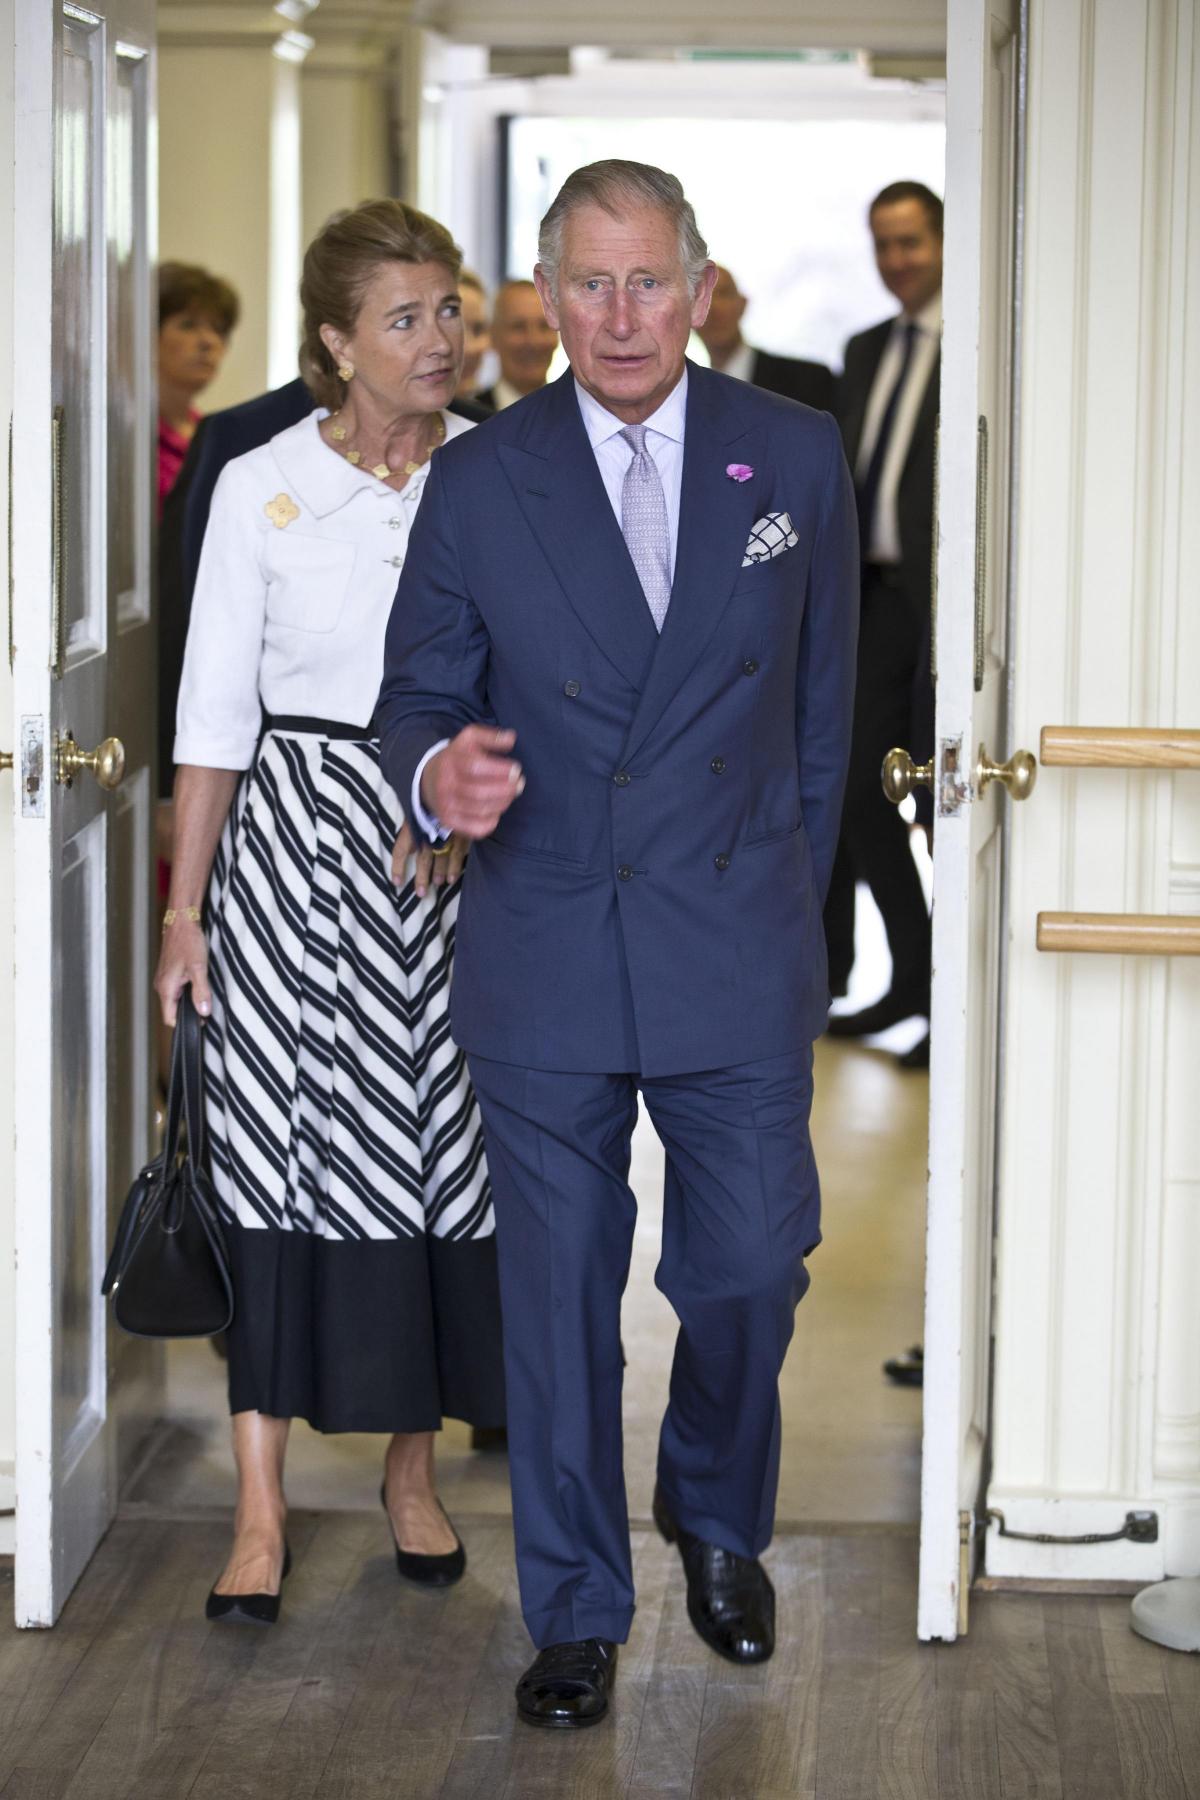 The Prince of Wales and the Duchess of Wellington